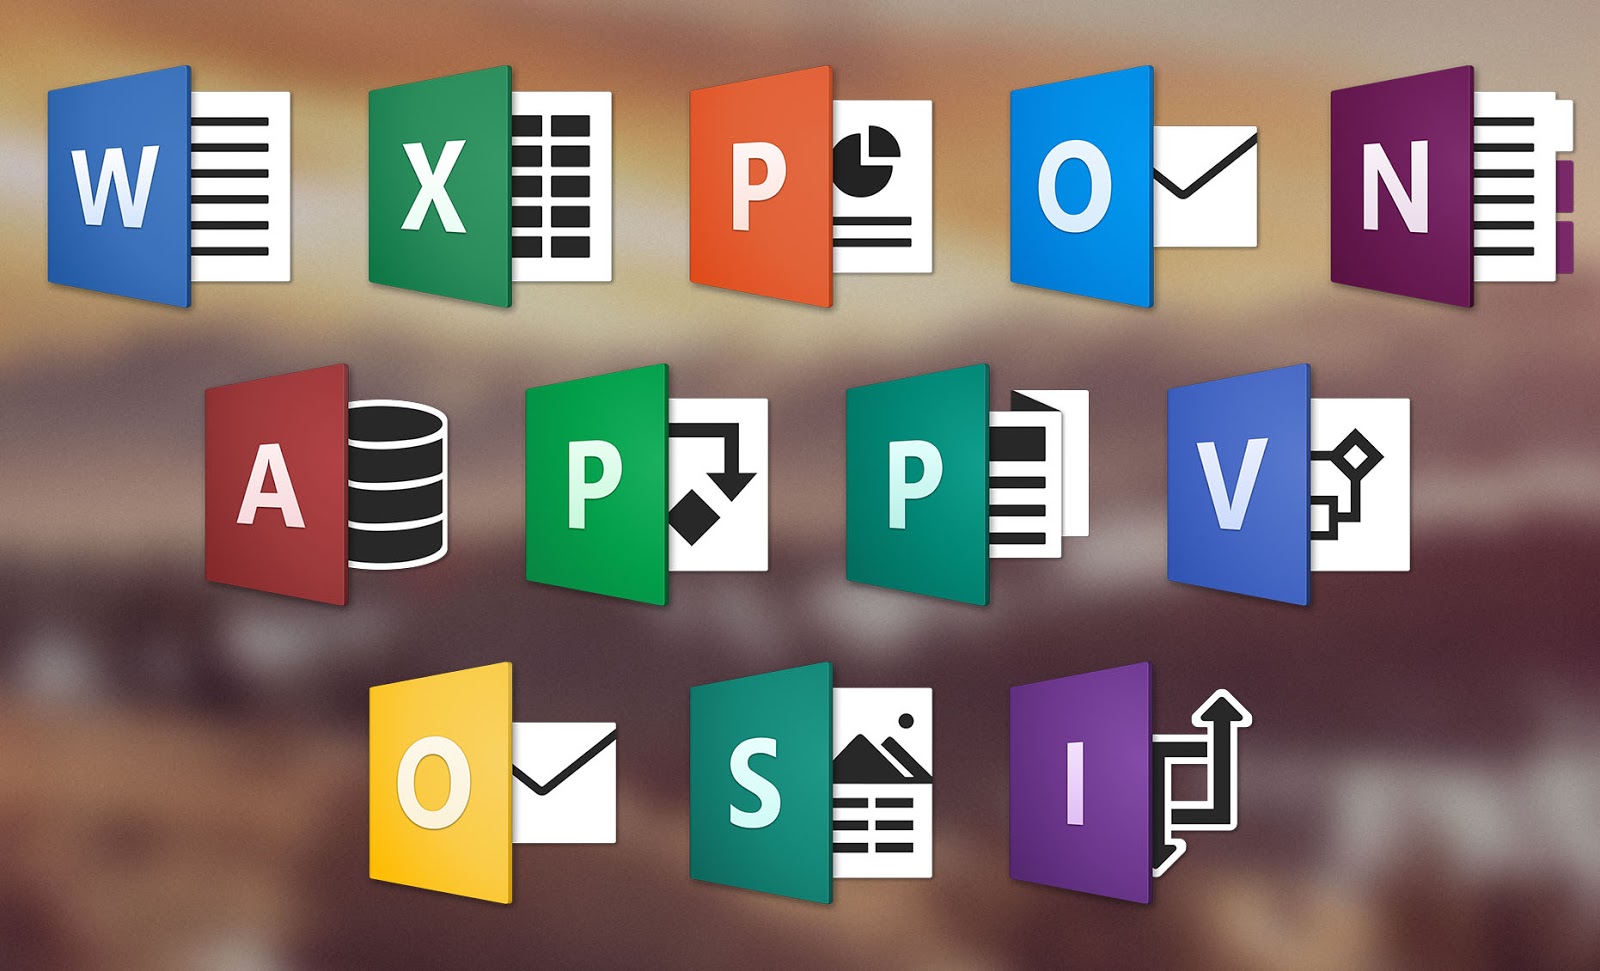 Office 2016 Is Microsoft’s Best Hope to Show It’s Changed | WIRED